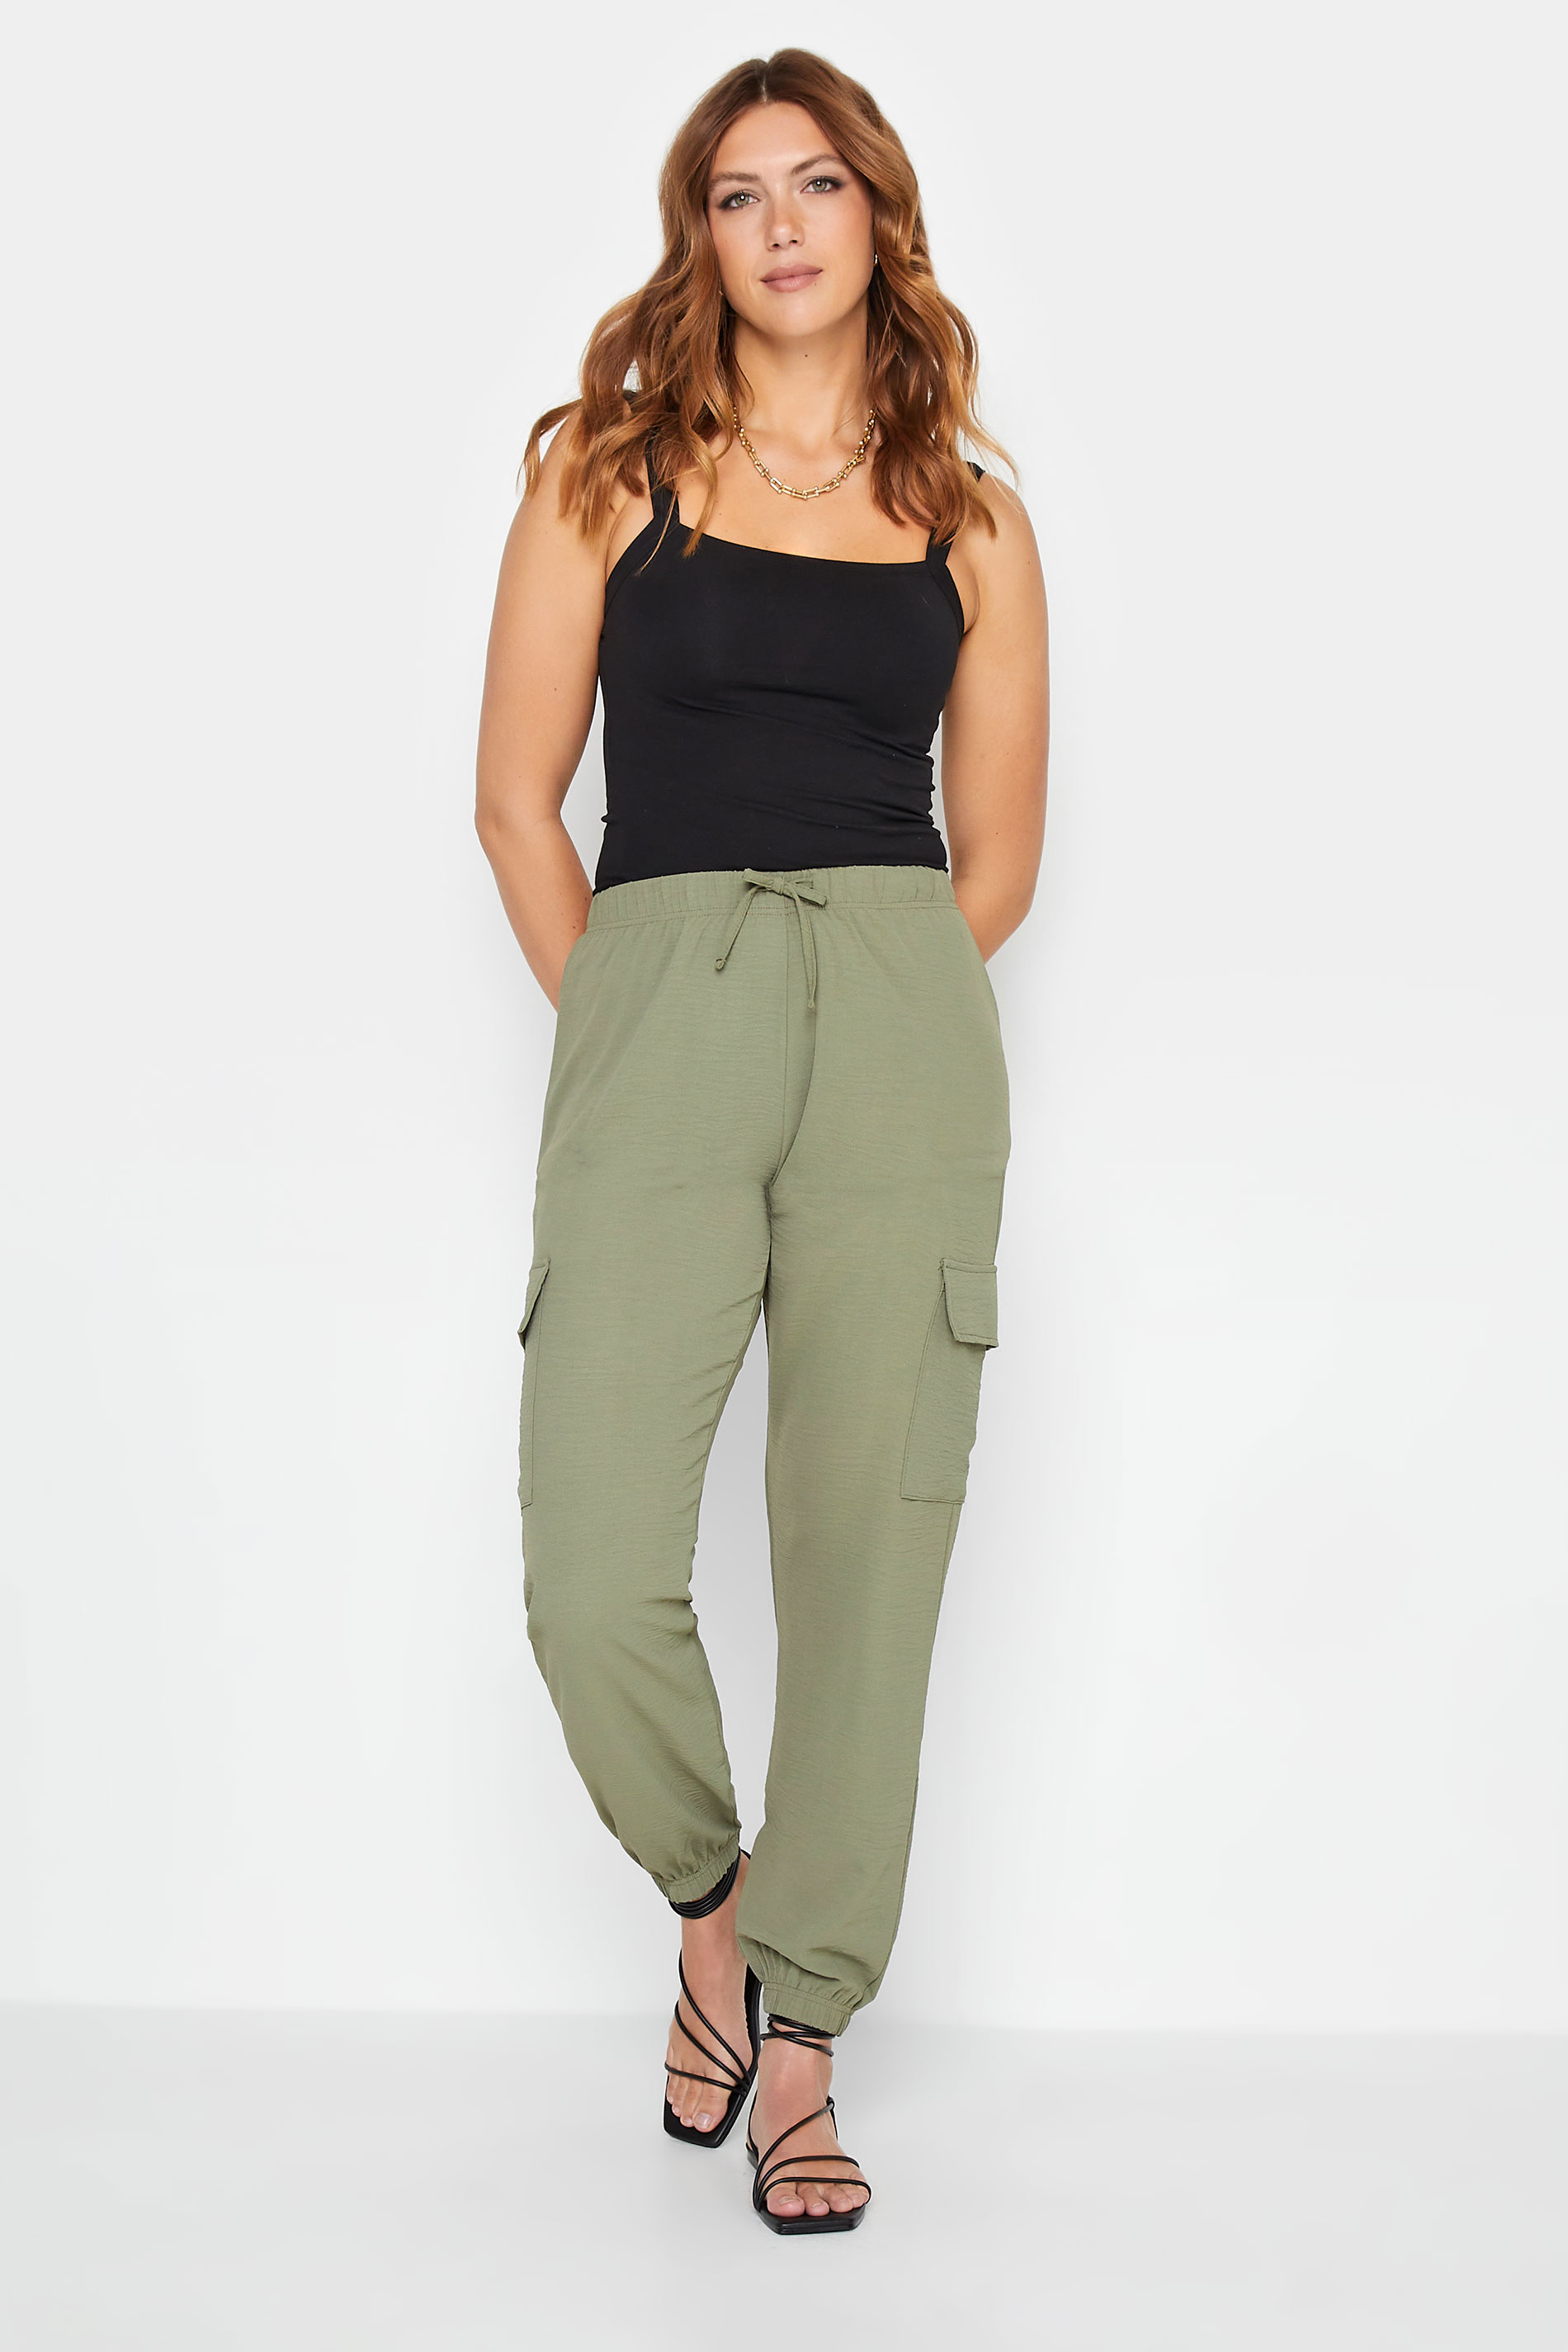 Meihuida Casual Cargo Trousers for Women Cotton Pants Solid India | Ubuy